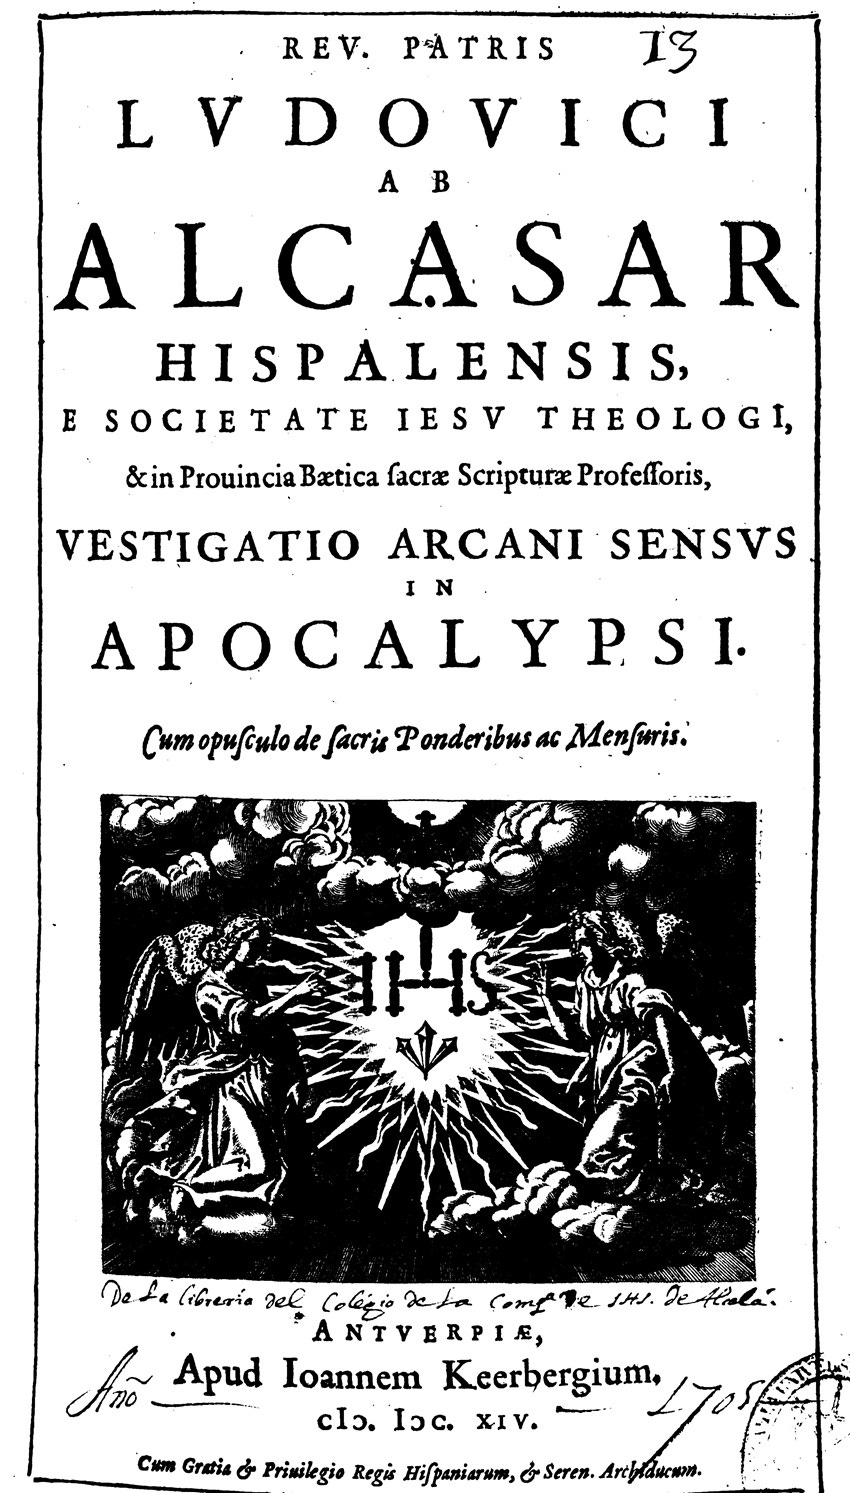 Luis del Alcázar's A Trace of the Mysterious Meaning in the Apocalypse